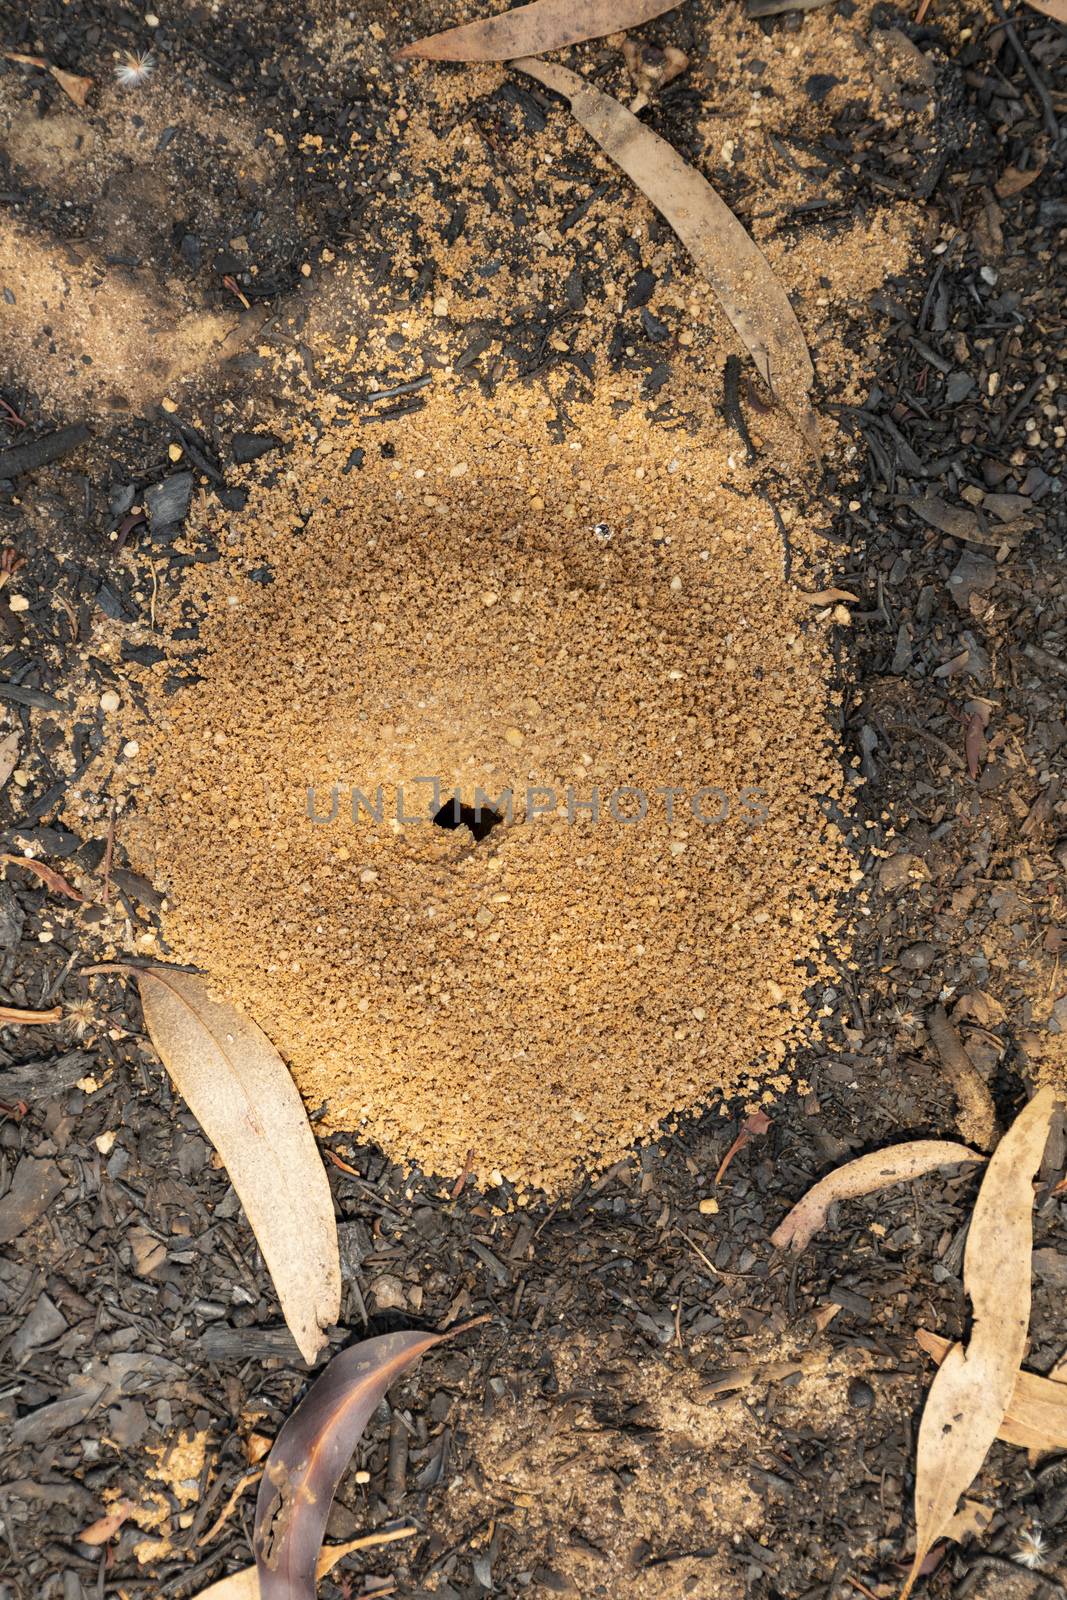 An ants nest on a dirt road after a bushfire in The Blue Mountains